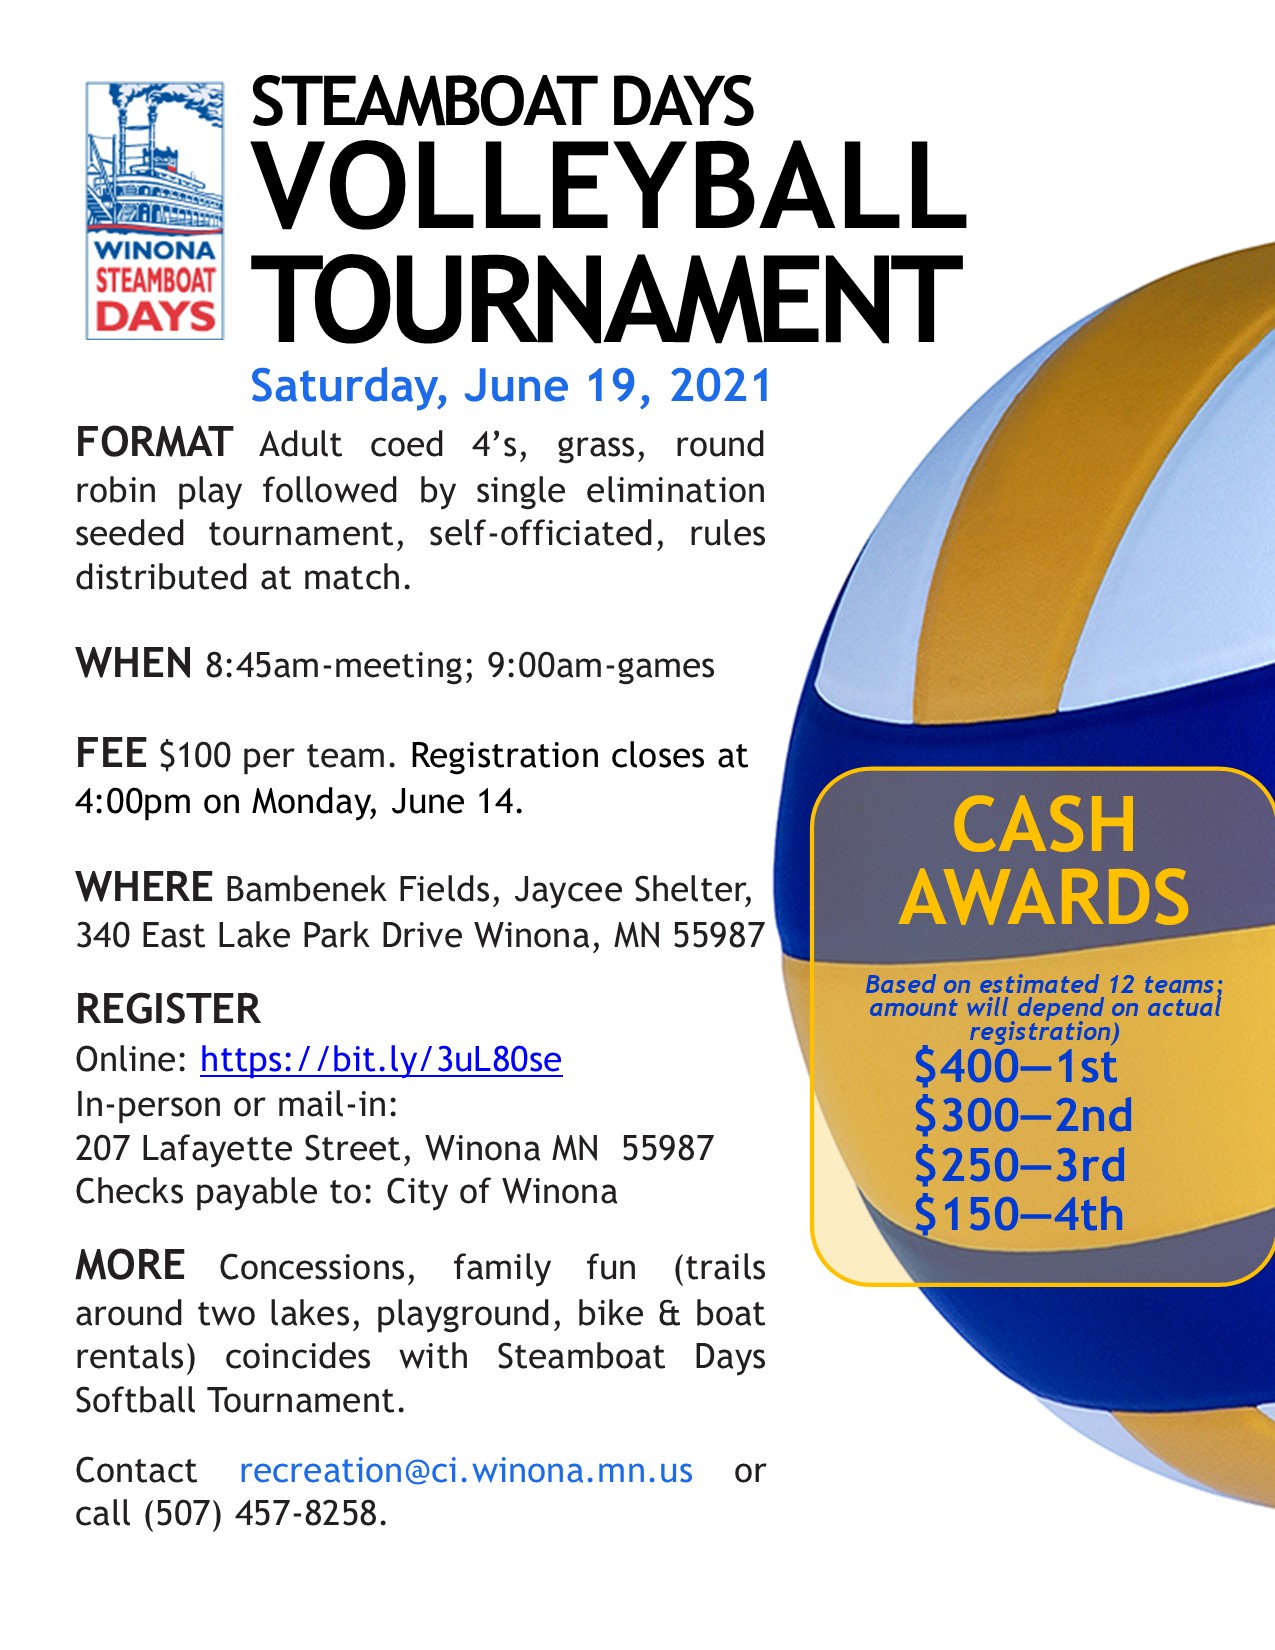 Steamboat Days Tournament 2021 flyer | Winona Steamboat Days